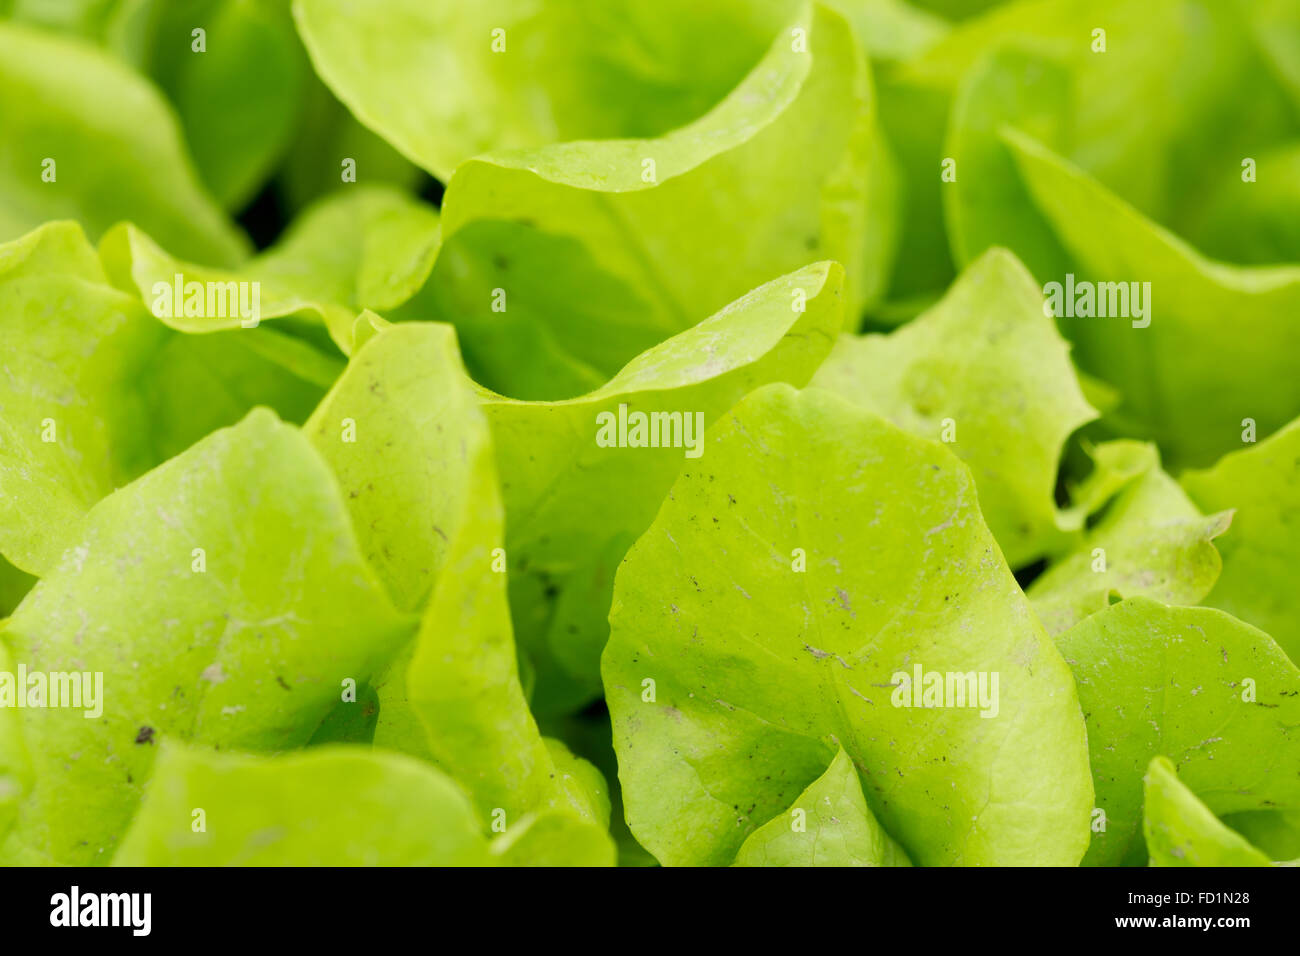 macro photography of some very small lettuce Stock Photo